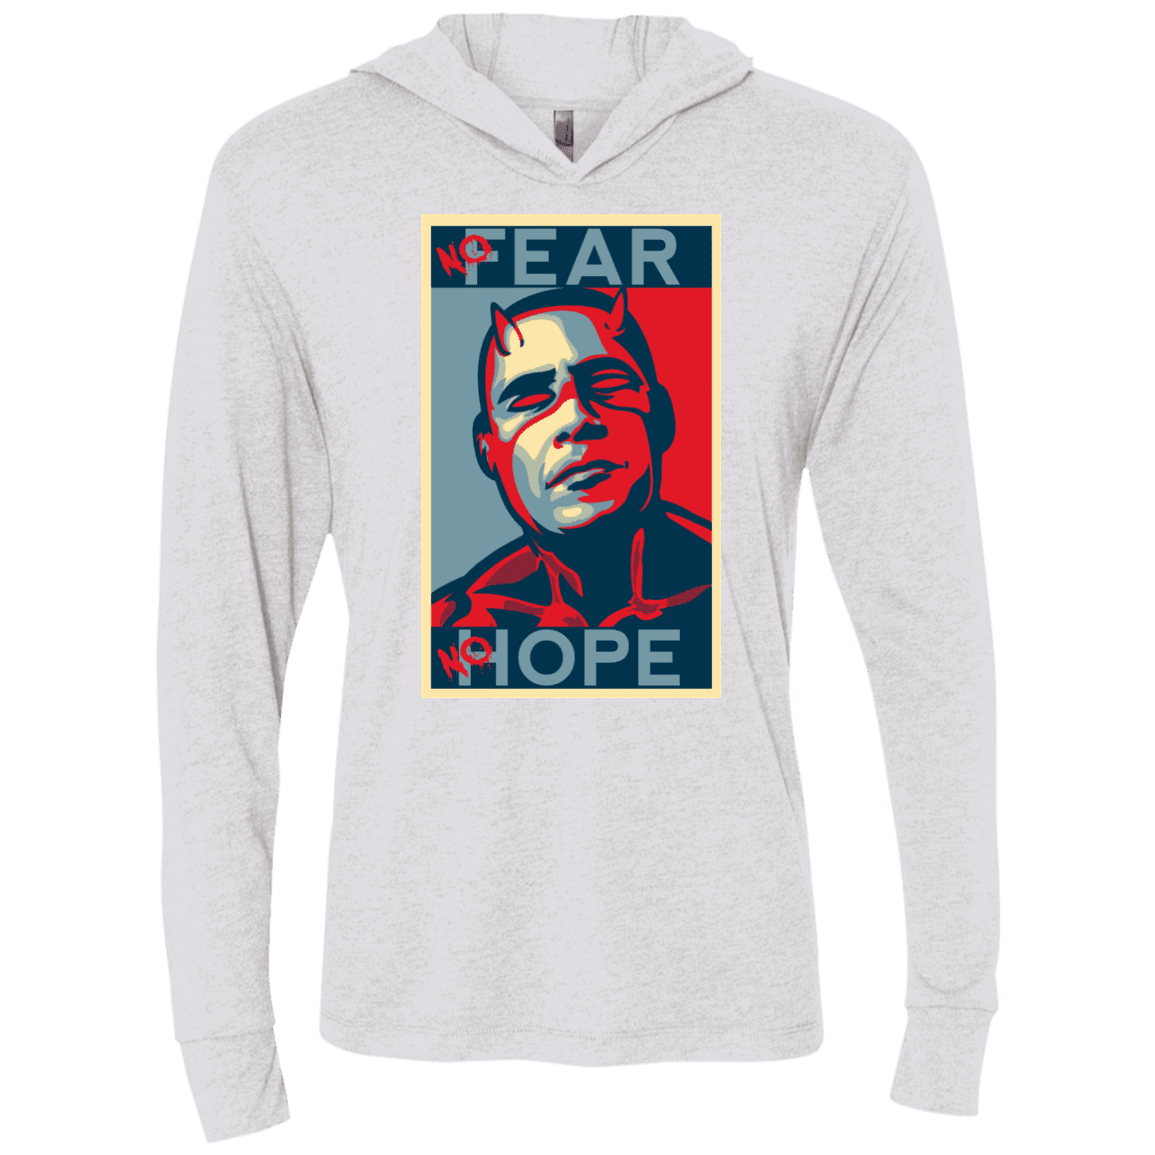 T-Shirts Heather White / X-Small A man with no fear Triblend Long Sleeve Hoodie Tee